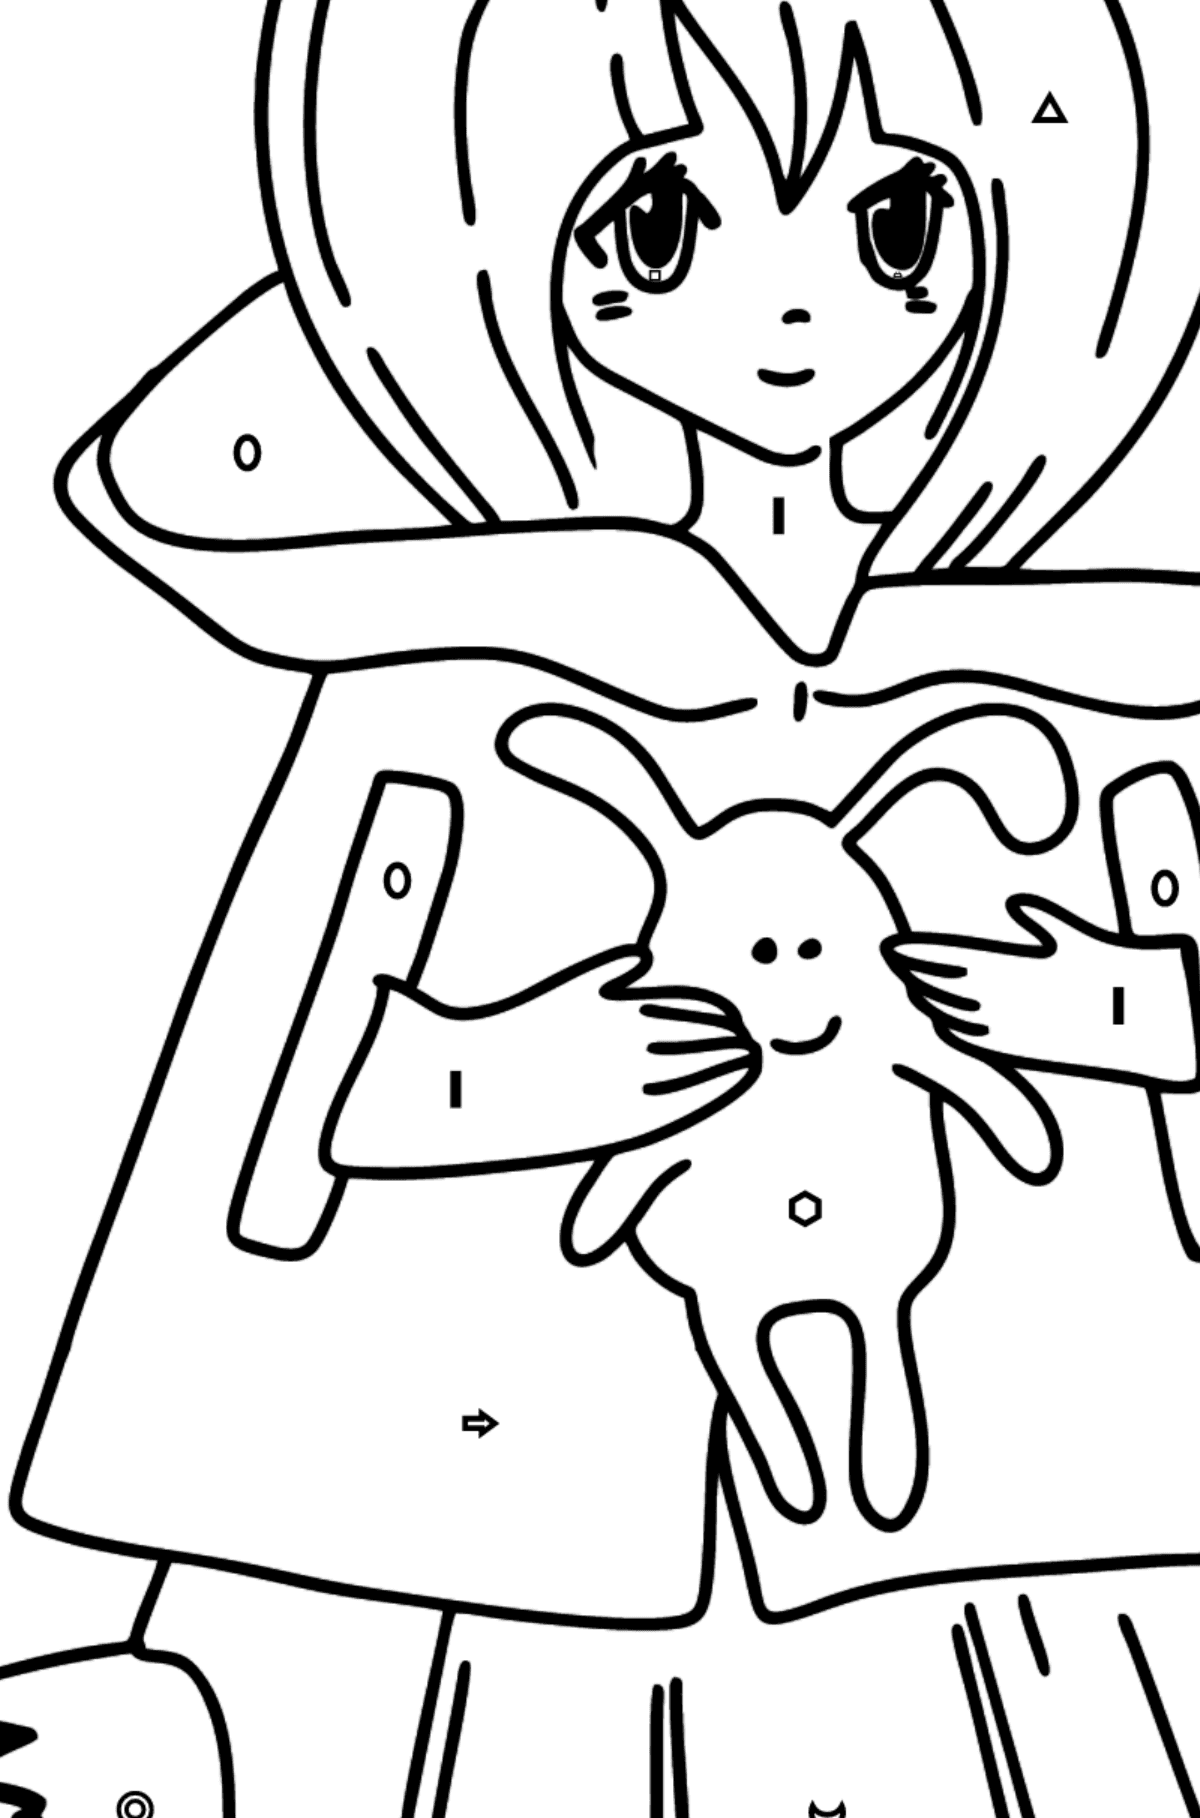 Anime Girl with Tail coloring page - Coloring by Symbols and Geometric Shapes for Kids